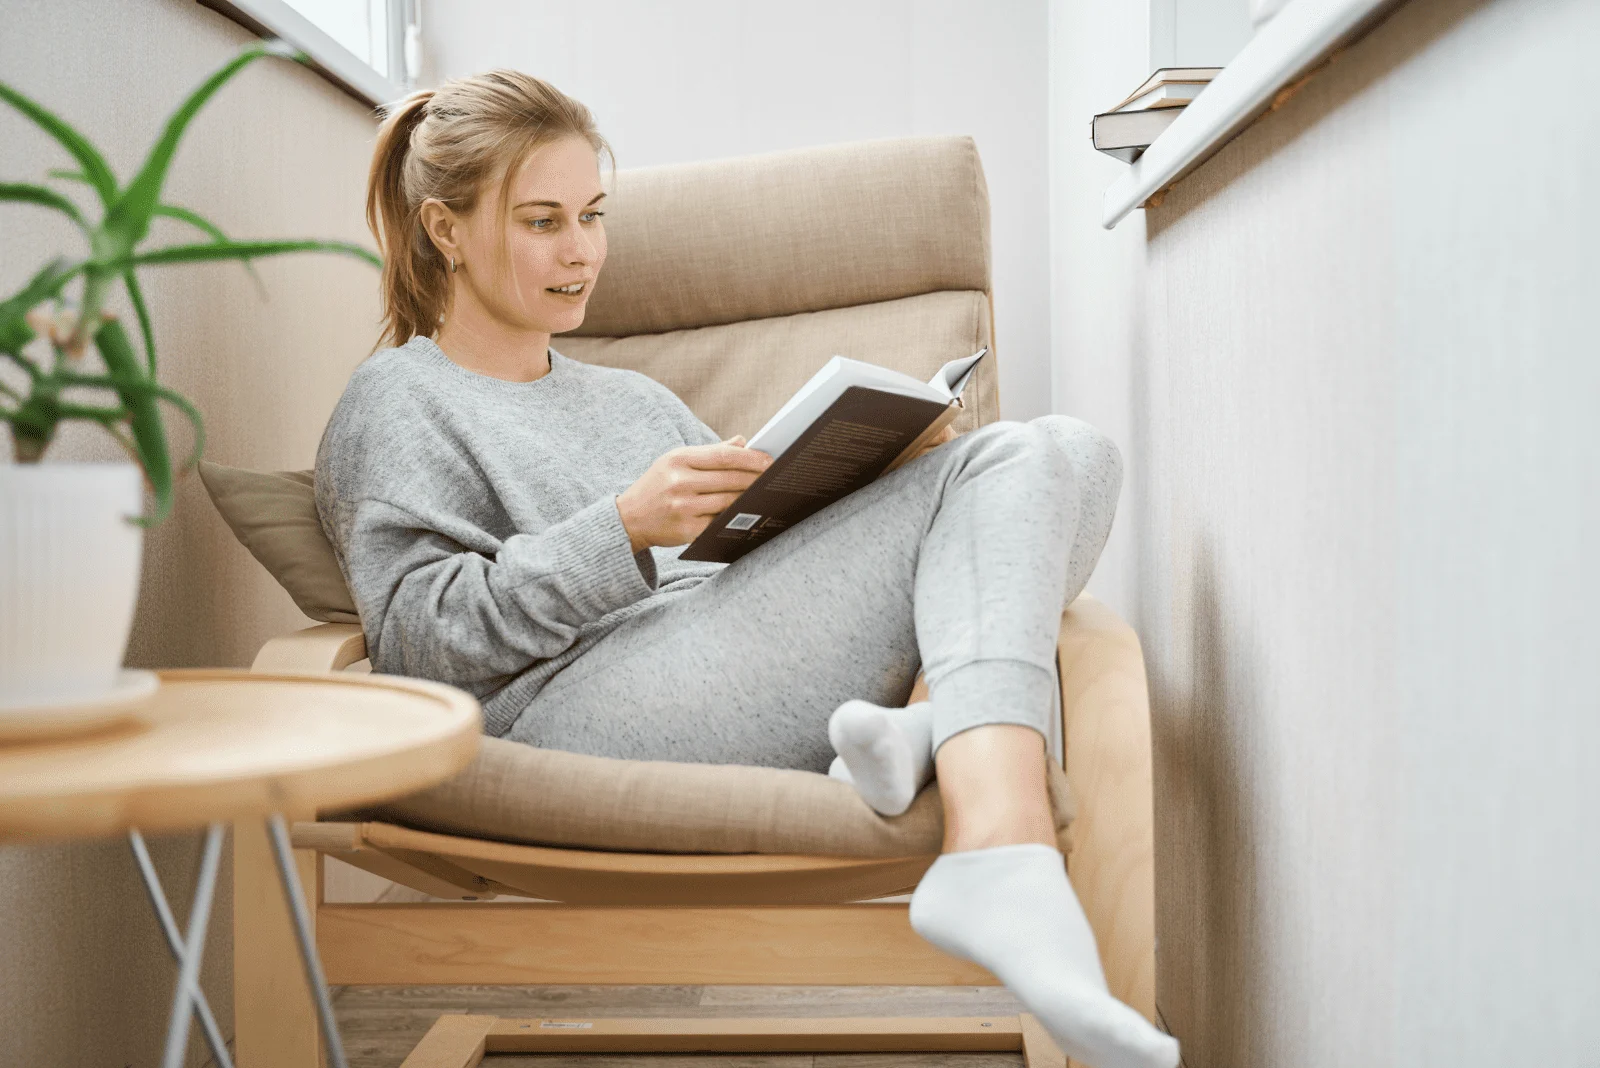 a beautiful woman with tied hair is sitting on an armchair and reading a book